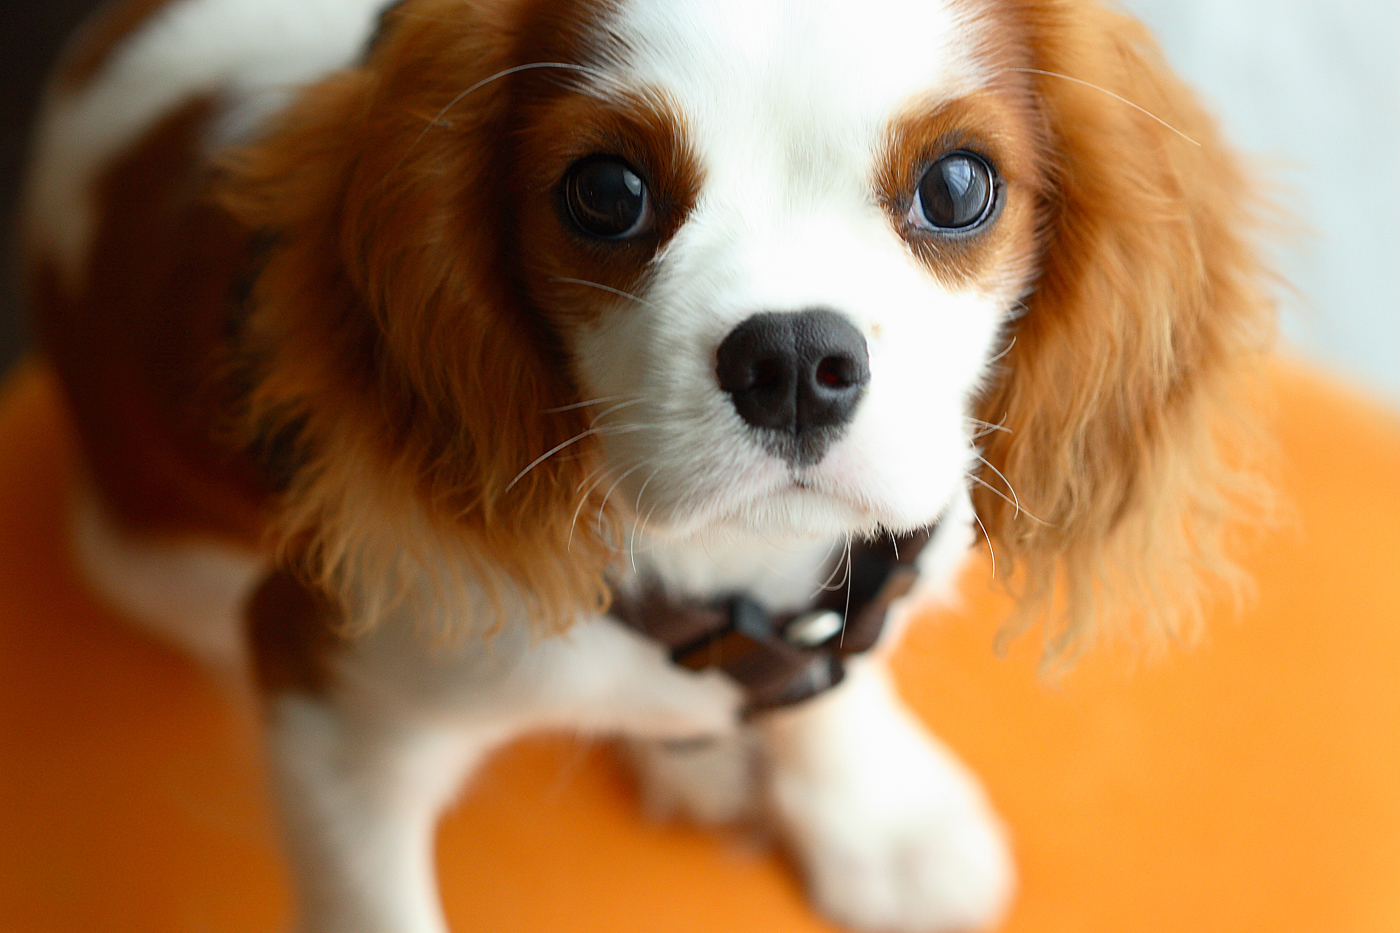 Cavalier King Charles Puppies For Sale Near Me